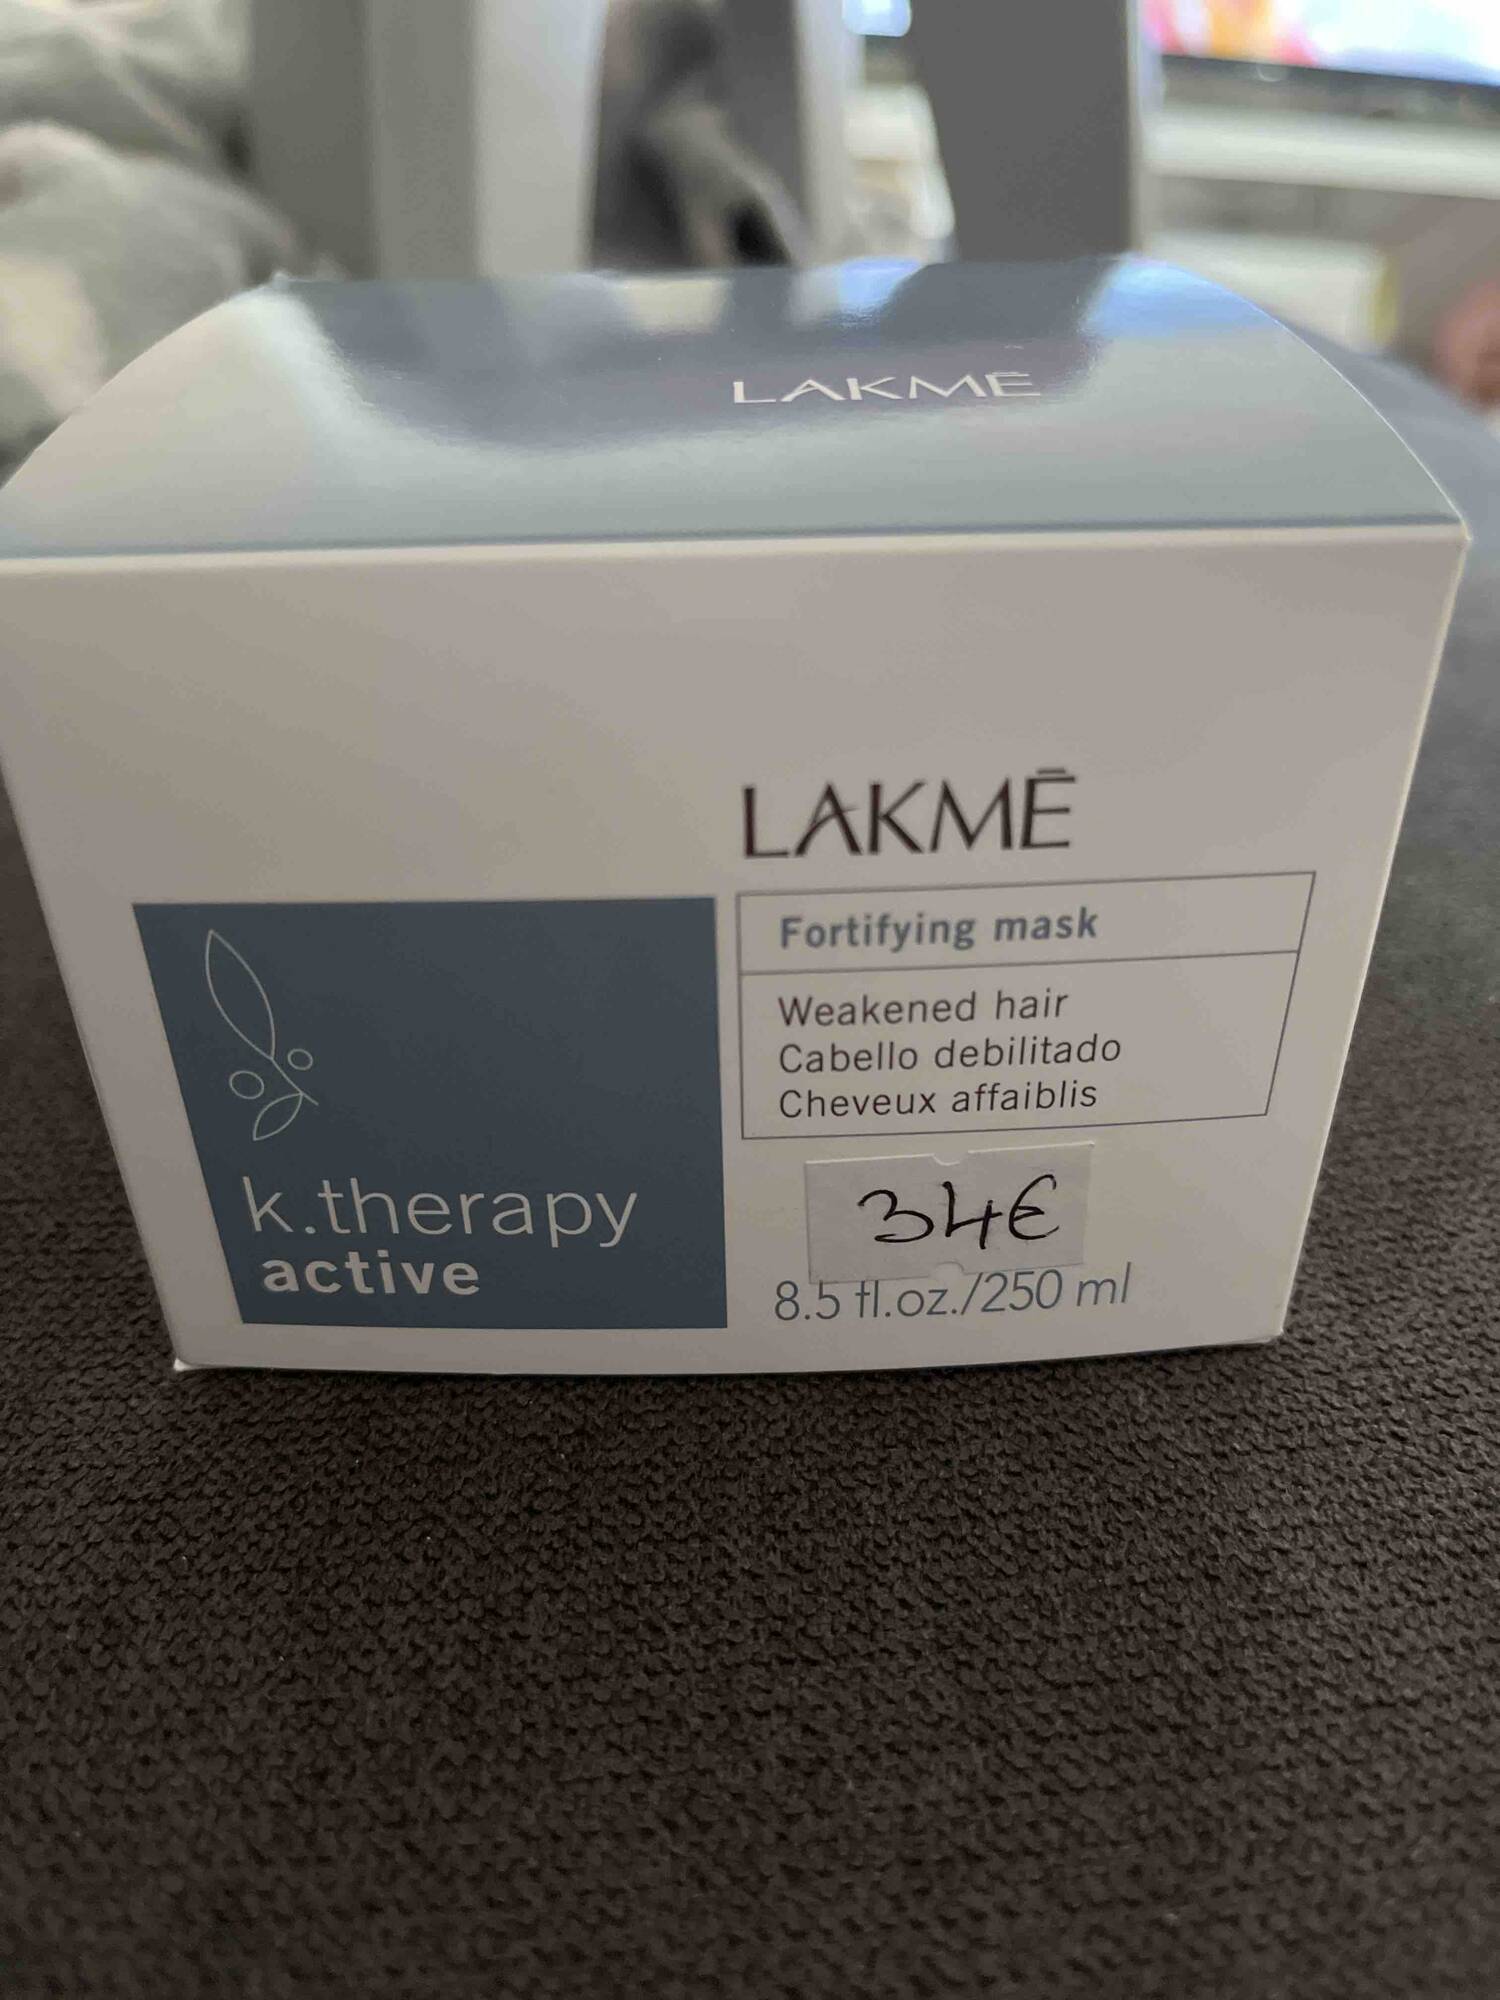 LAKME - K-therapy active - Fortifying mask